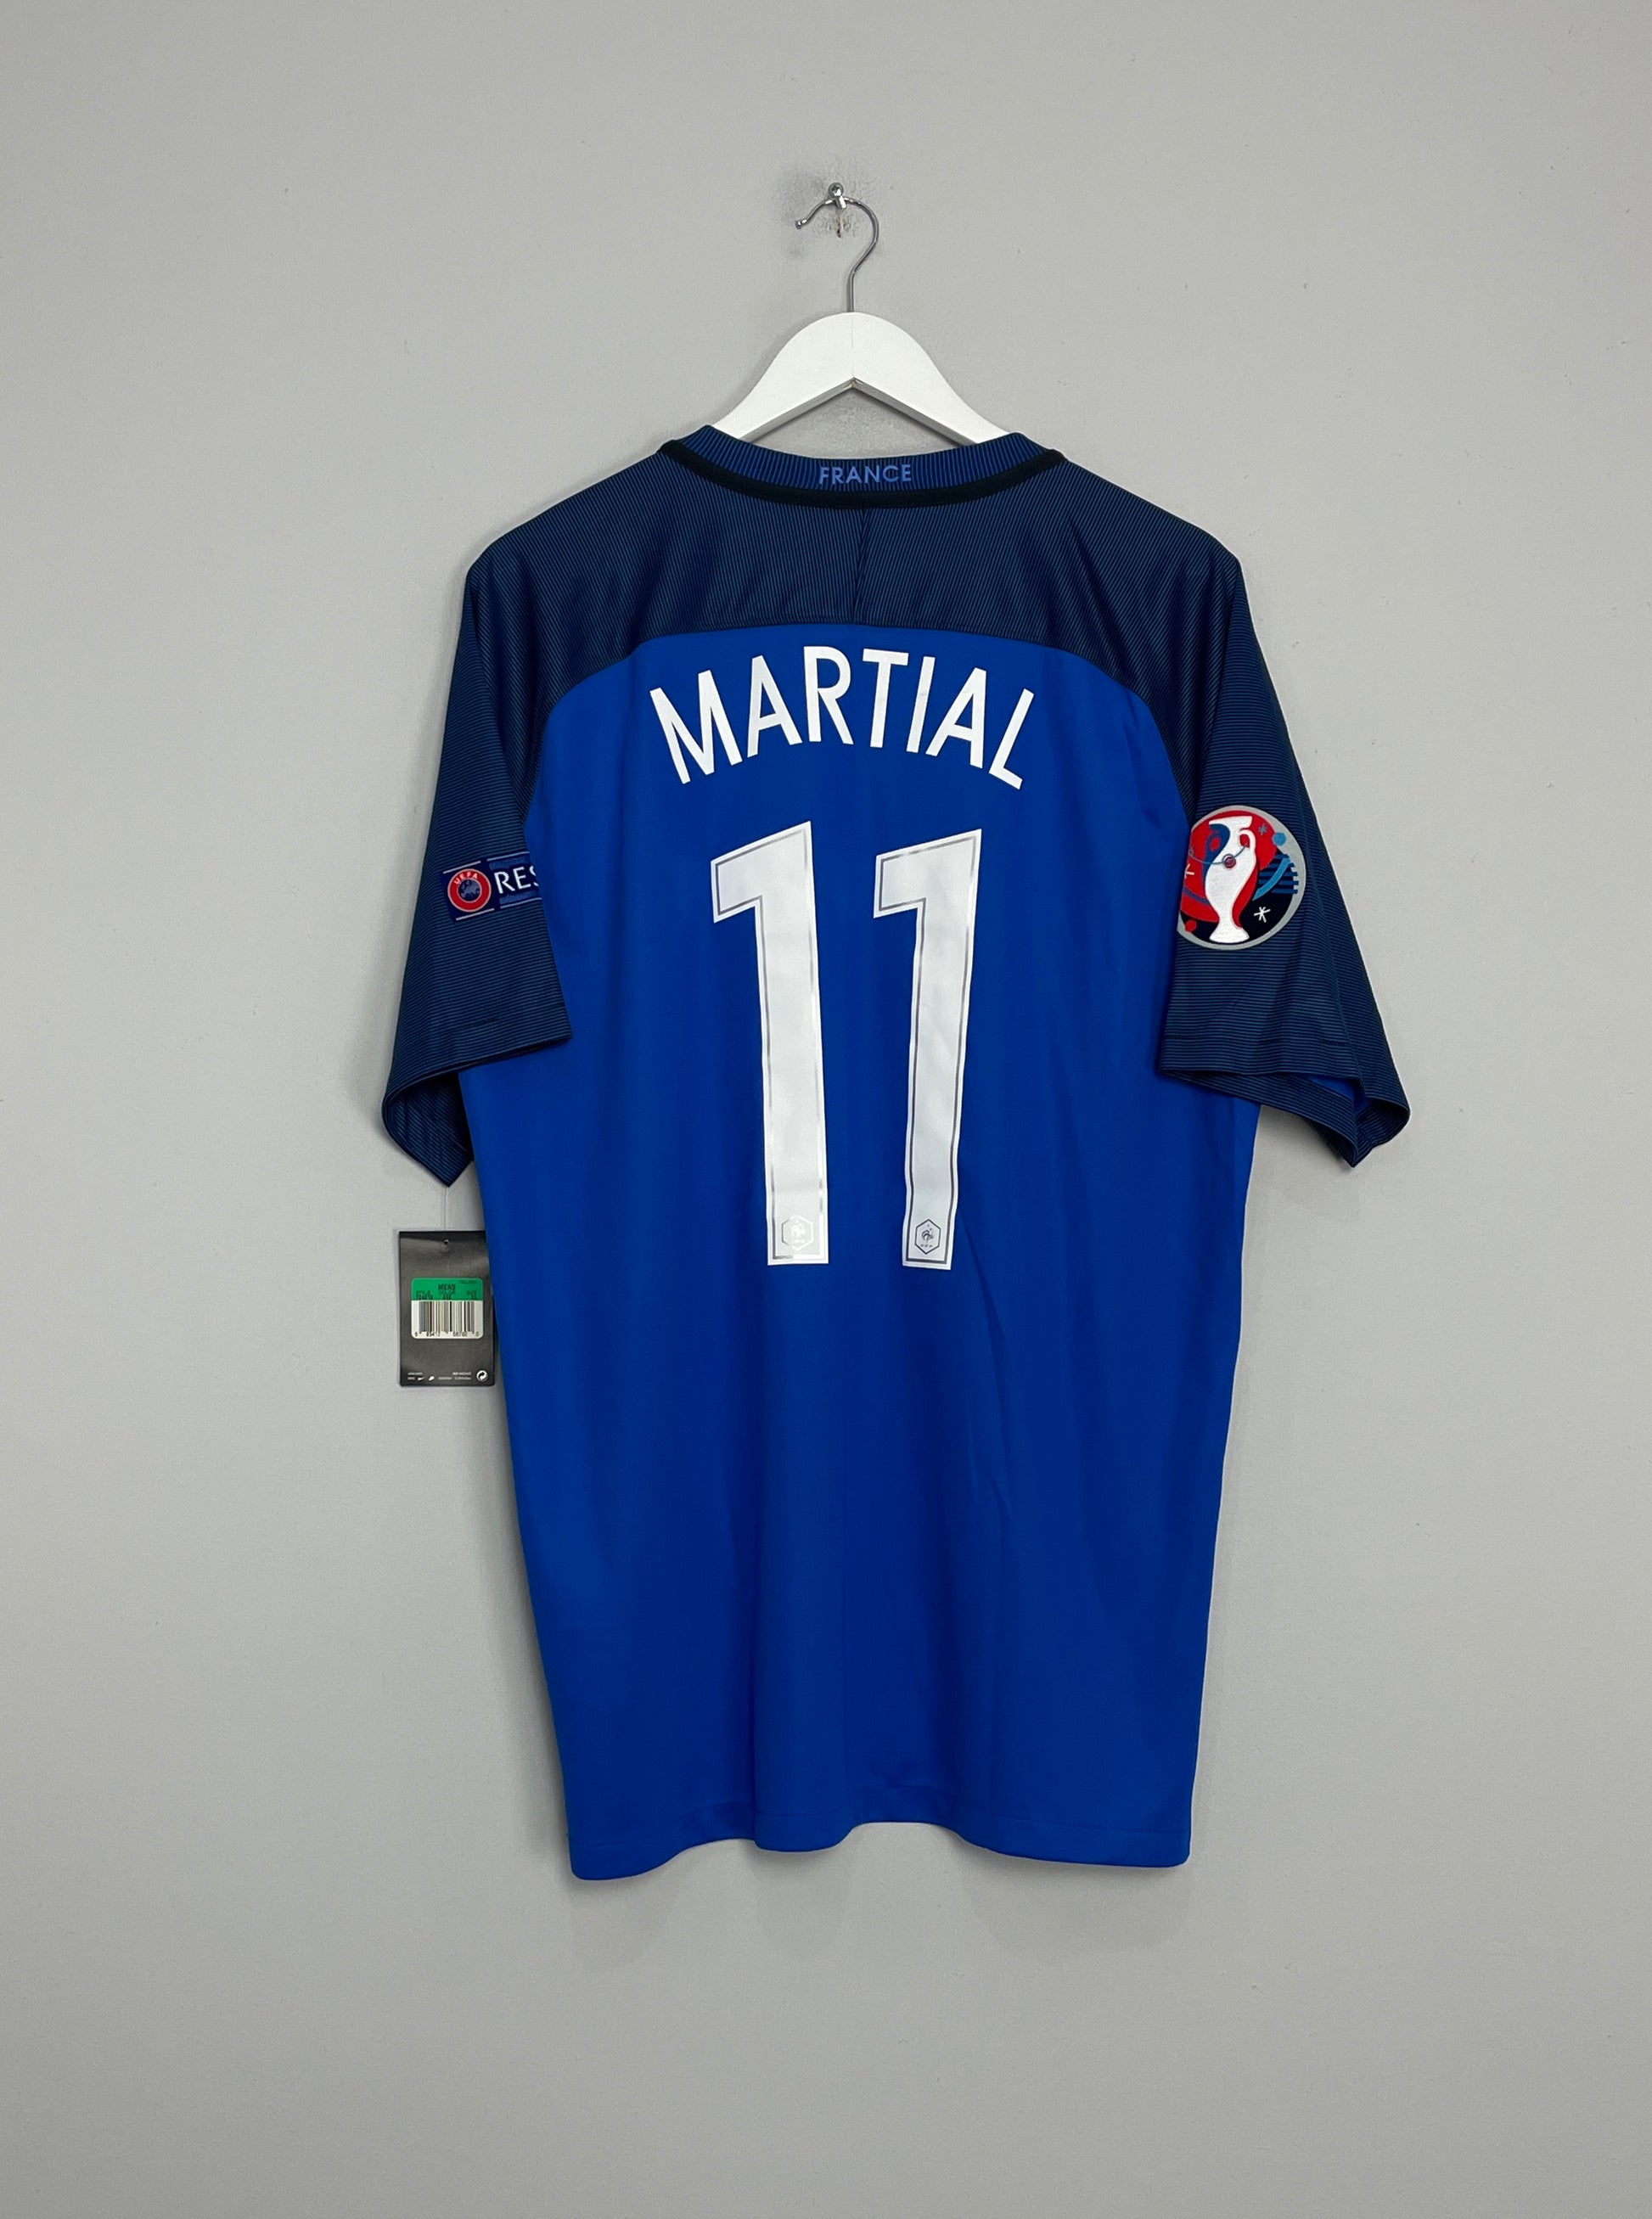 Image of the France Martial shirt from the 2016/17 season